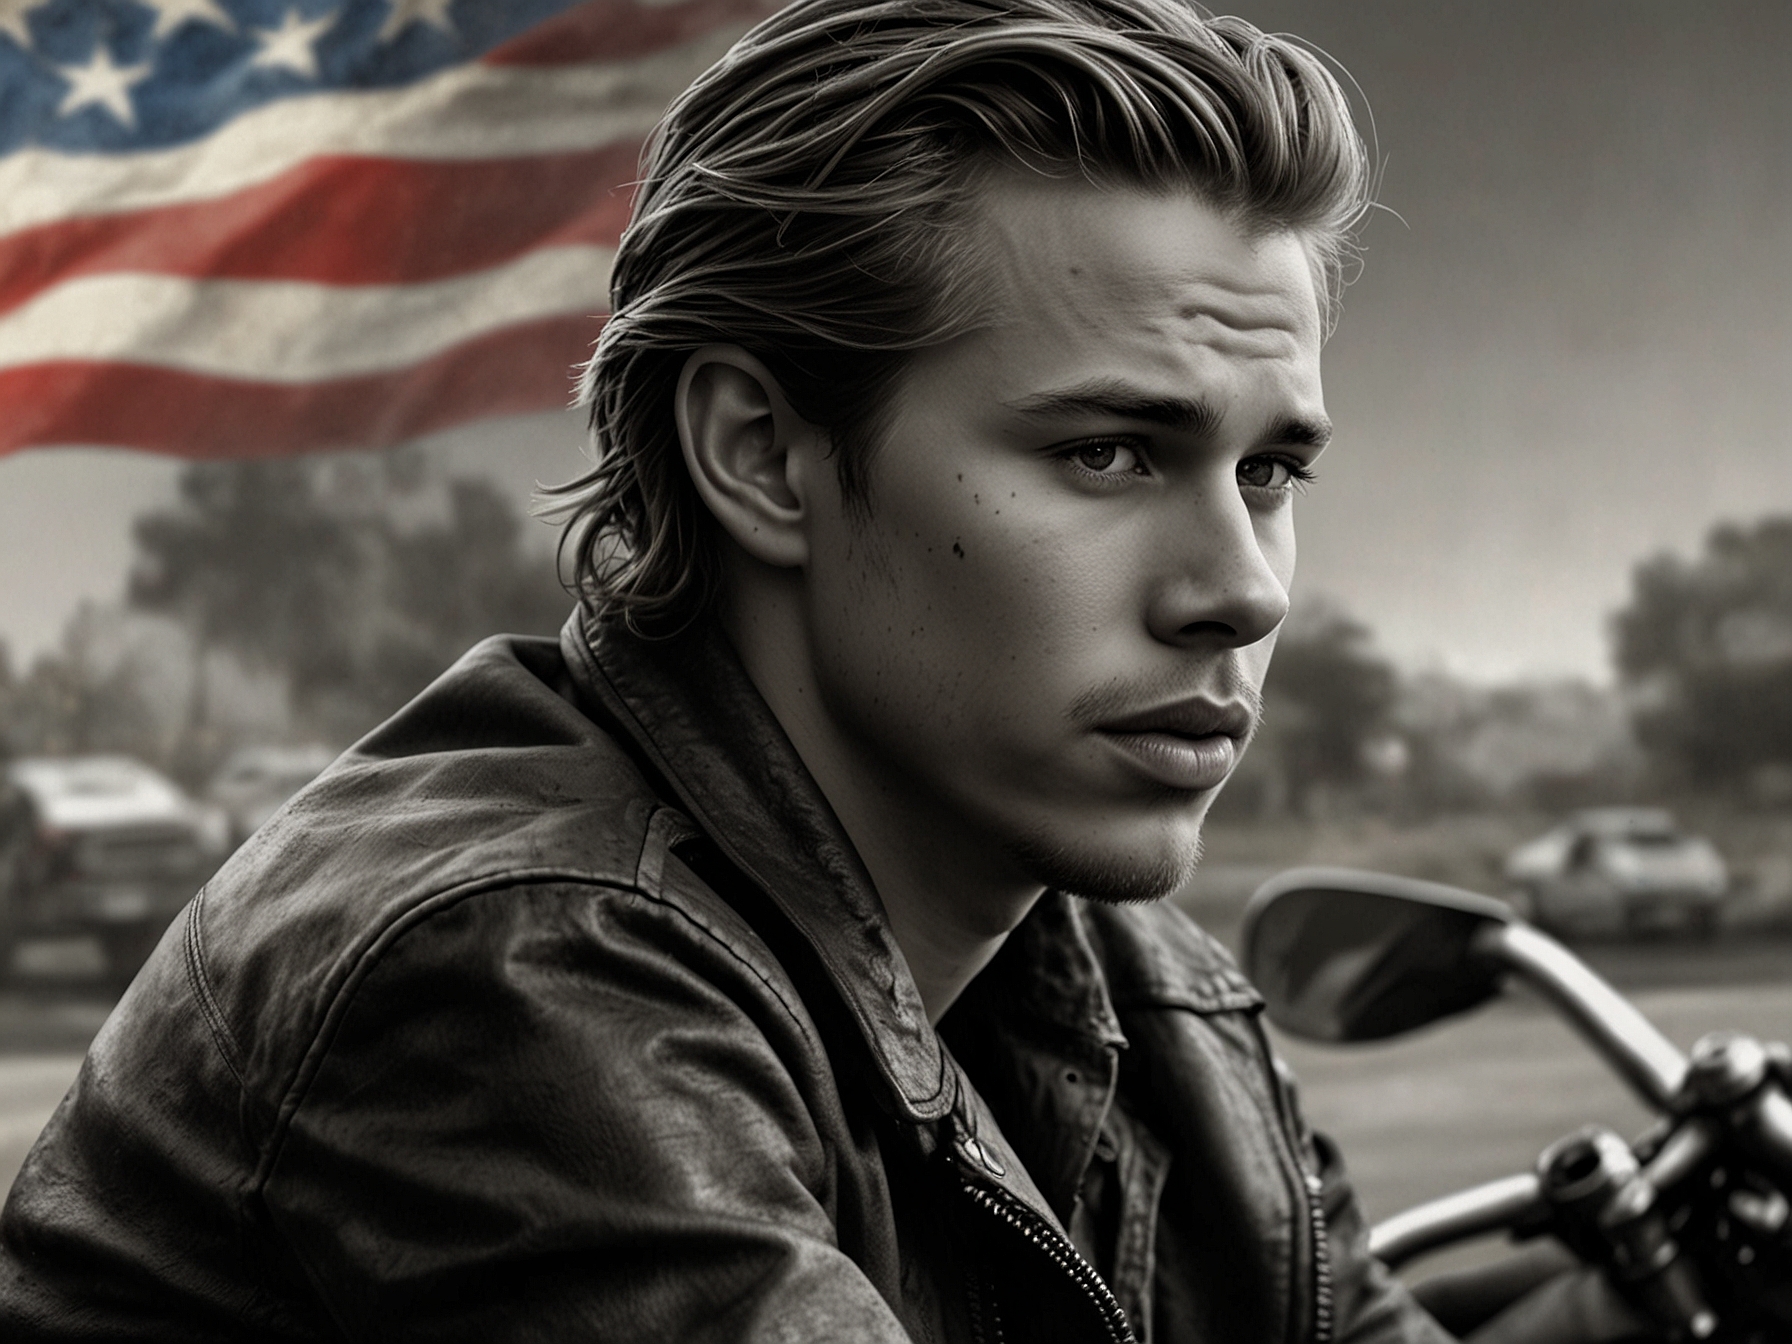 A promotional image of Austin Butler from his latest film 'The Bikeriders', illustrating his dedication to the role and the film's significance in his career.